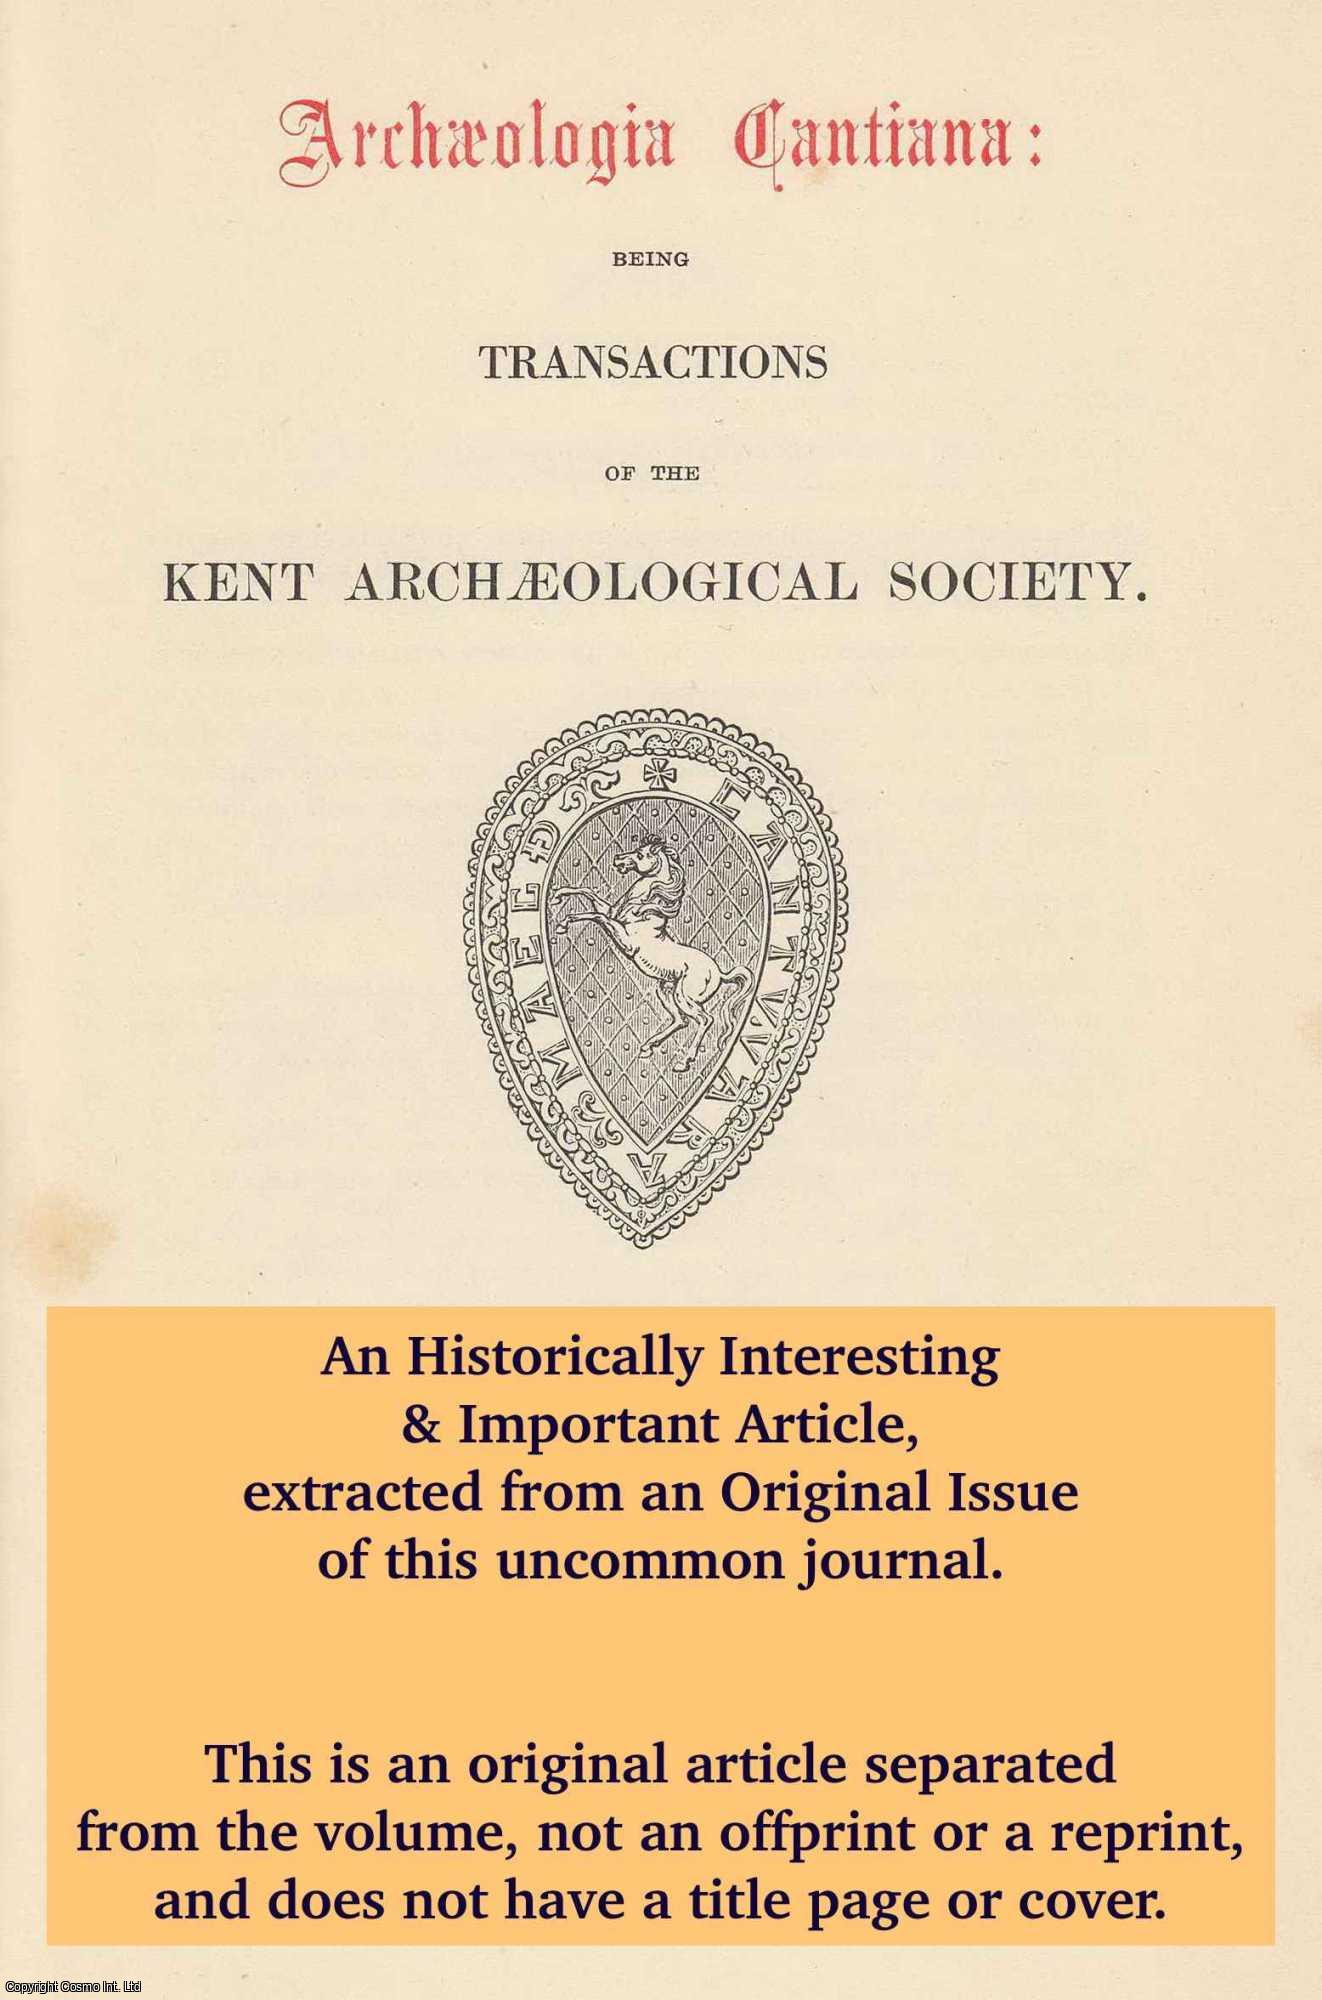 J.H. Williams - Excavations at Gravel Walk, Canterbury, 1967. An original article from The Archaeologia Cantiana: Transactions of The Kent Archaeological Society, 1976.